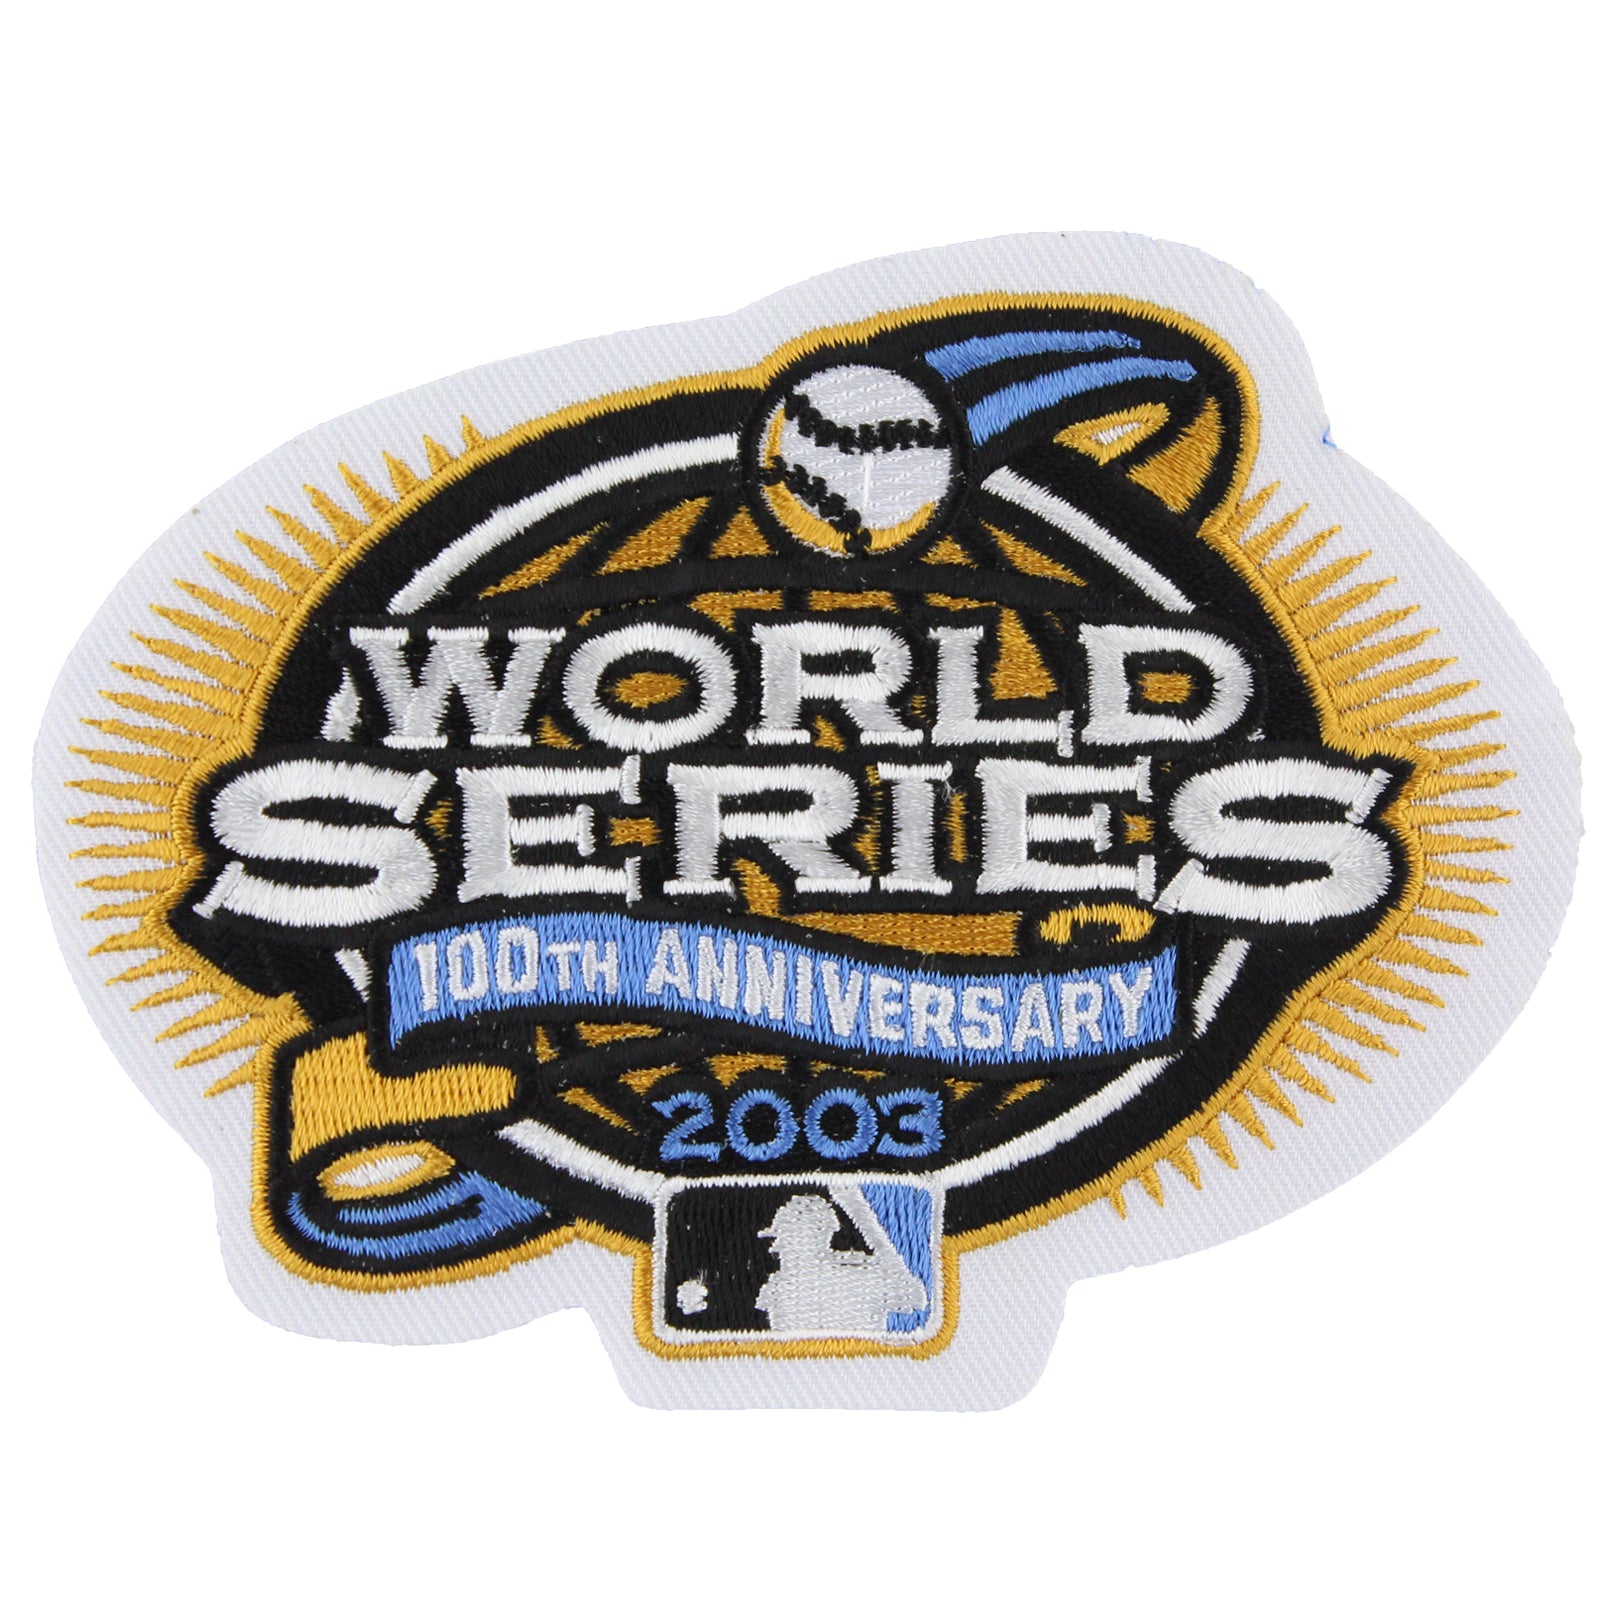 world series patches